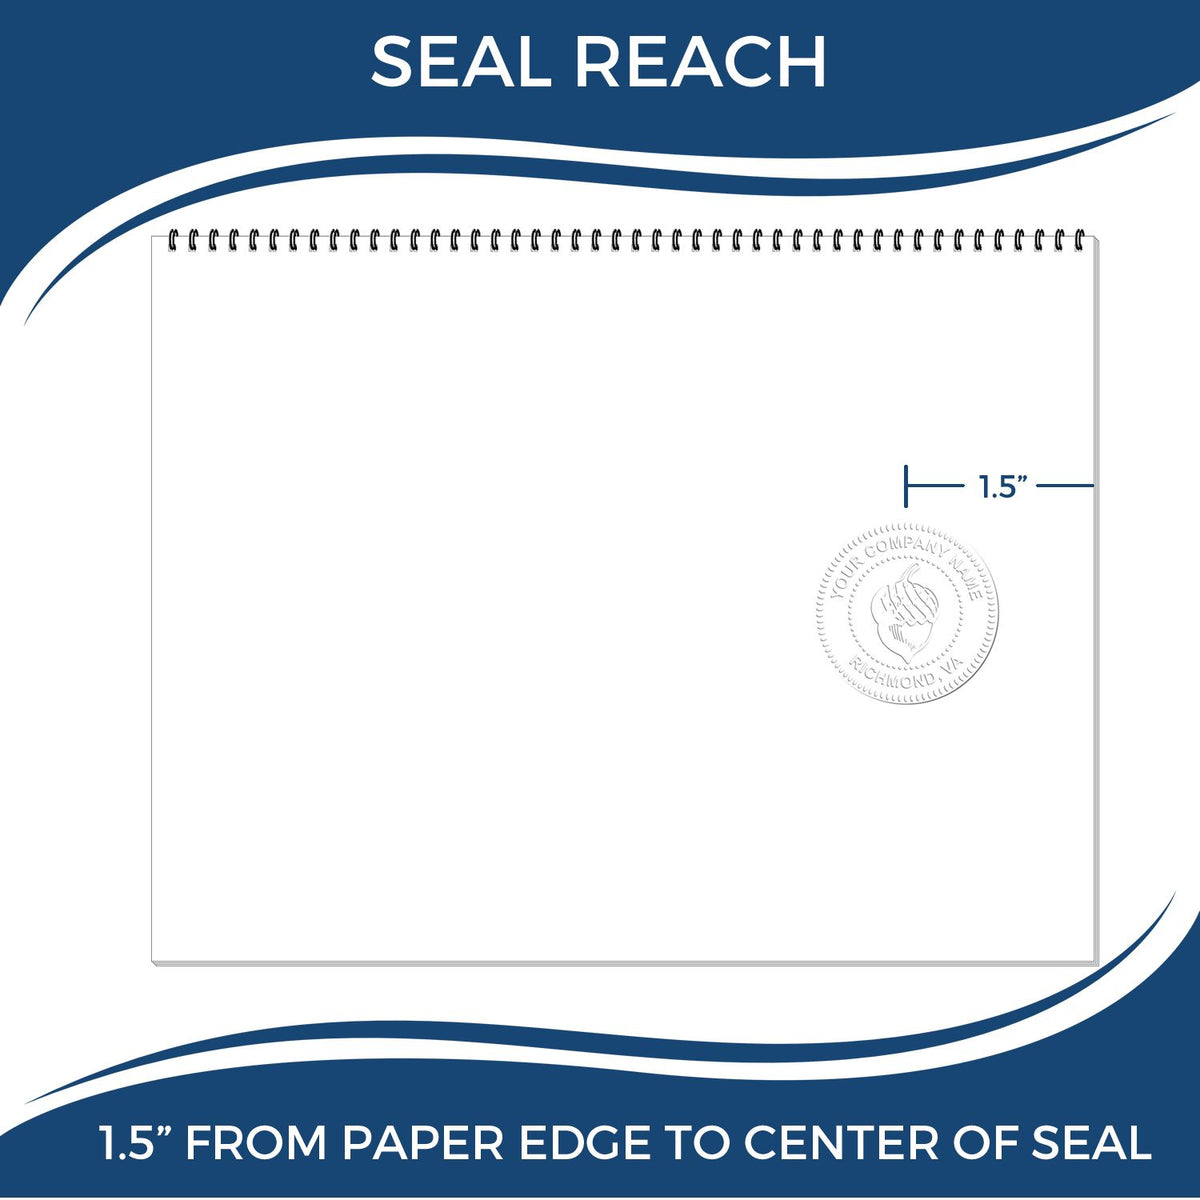 An infographic showing the seal reach which is represented by a ruler and a miniature seal image of the Hybrid North Dakota Geologist Seal